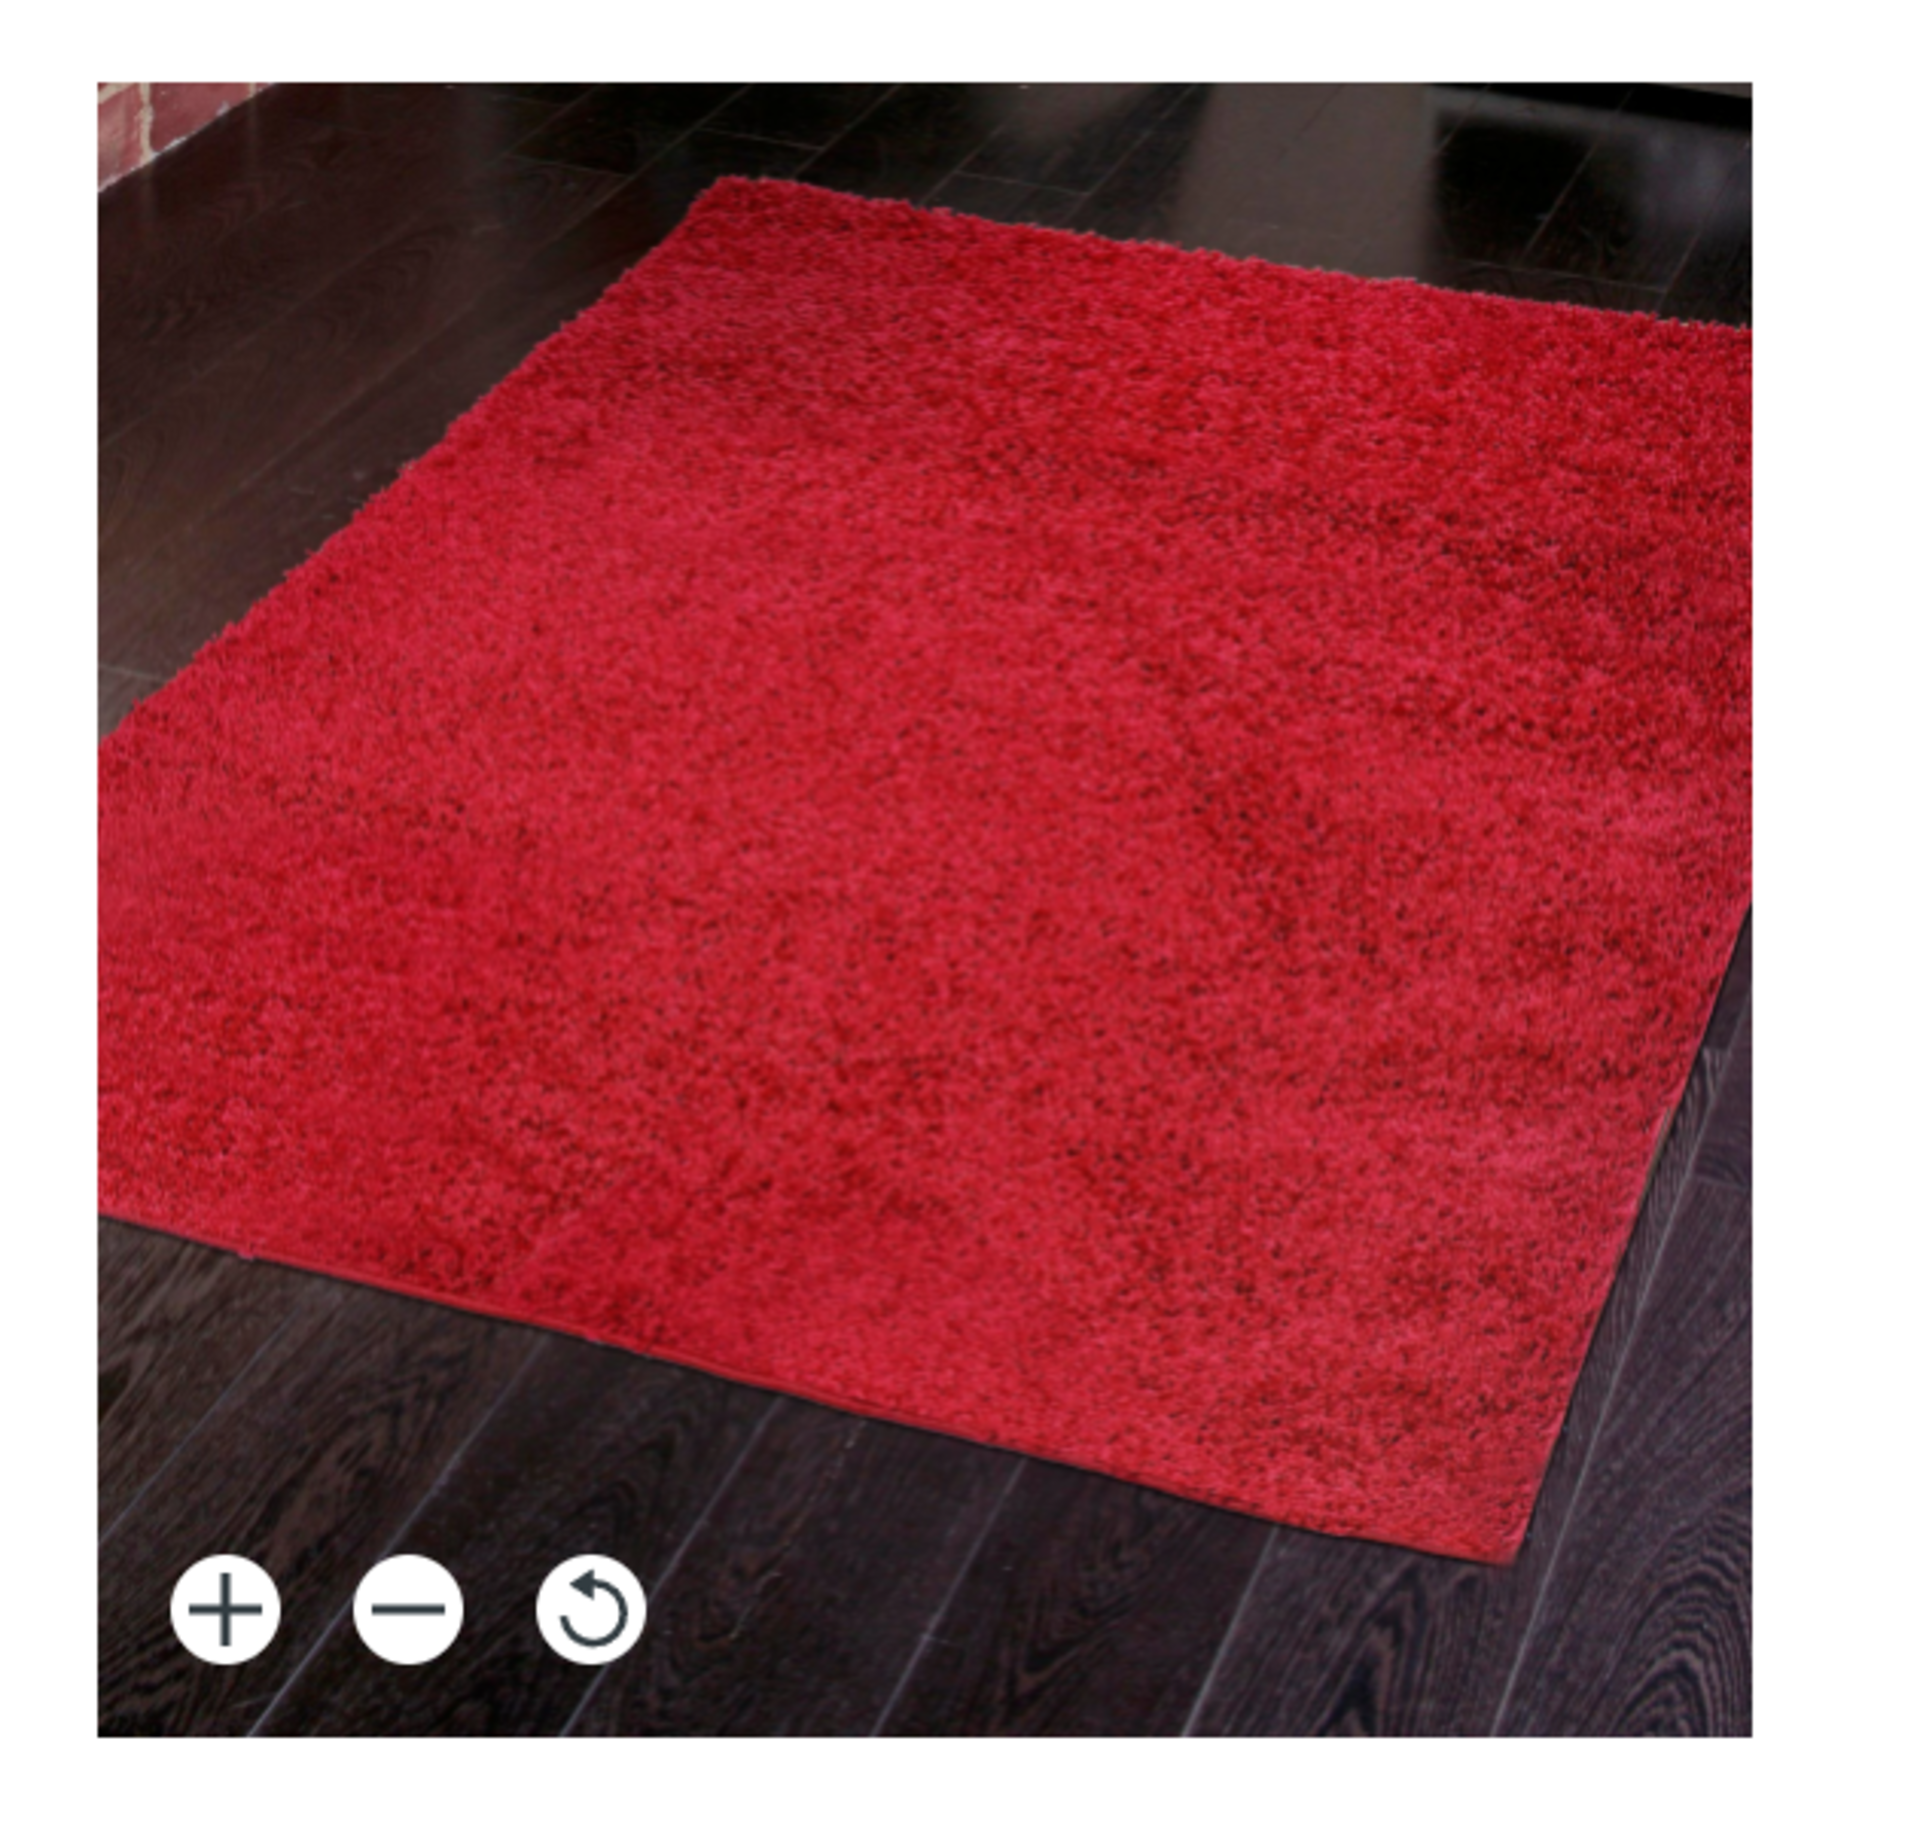 NEW PACKAGED COLOURS KALA SHAGGY RUG IN RED 120X160CM - T/R - Image 2 of 2